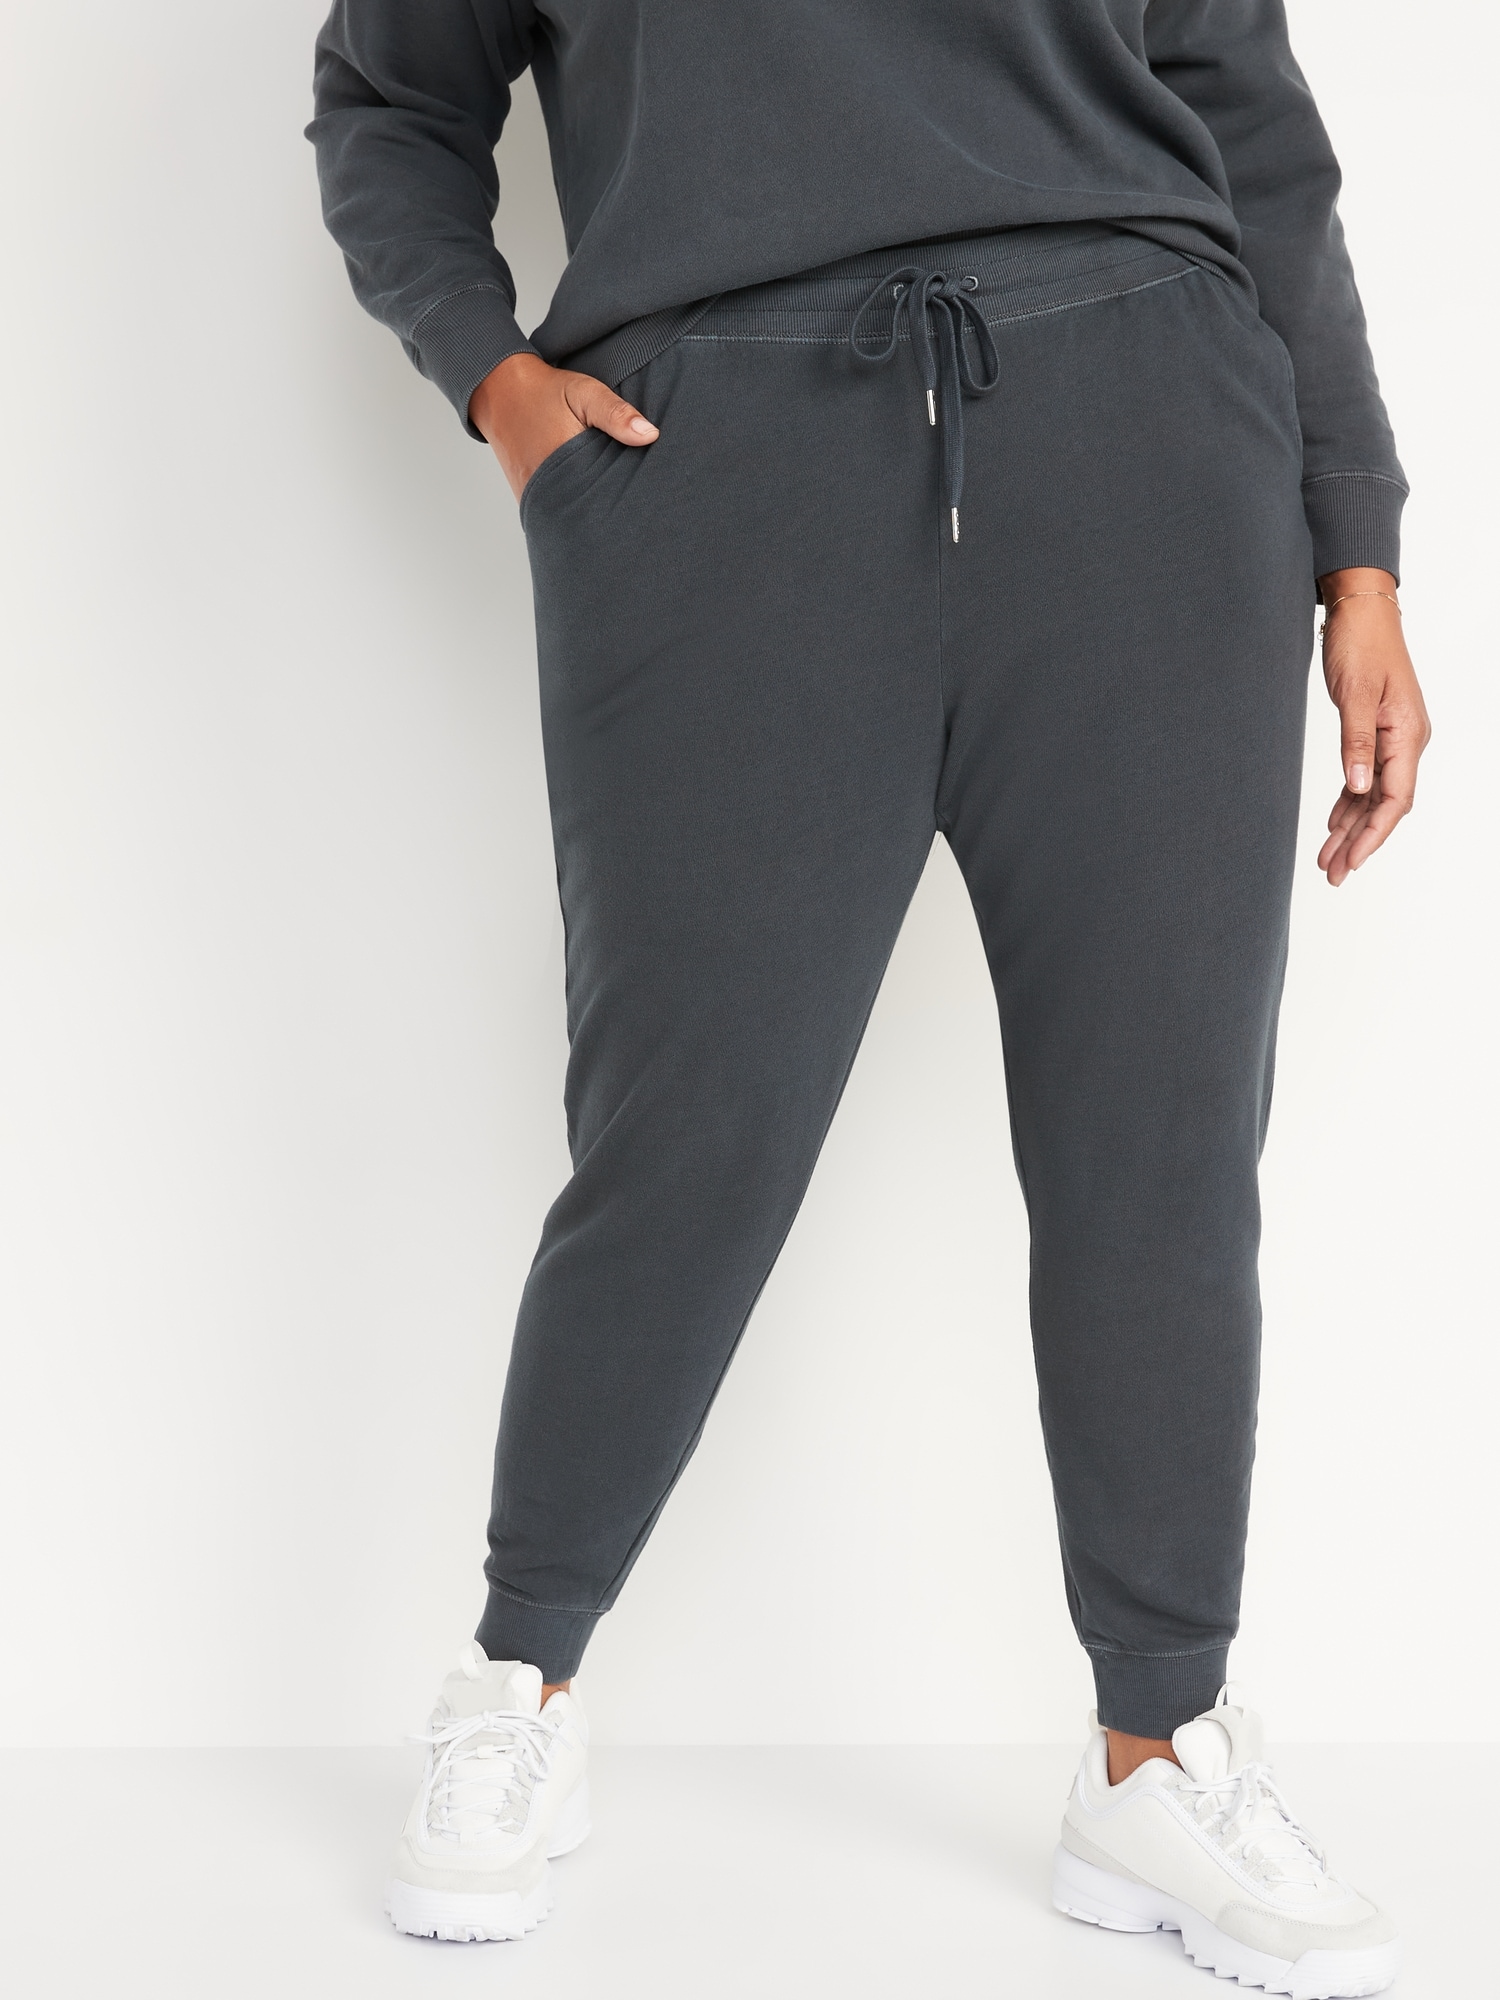 Tapered Sweatpants for Women